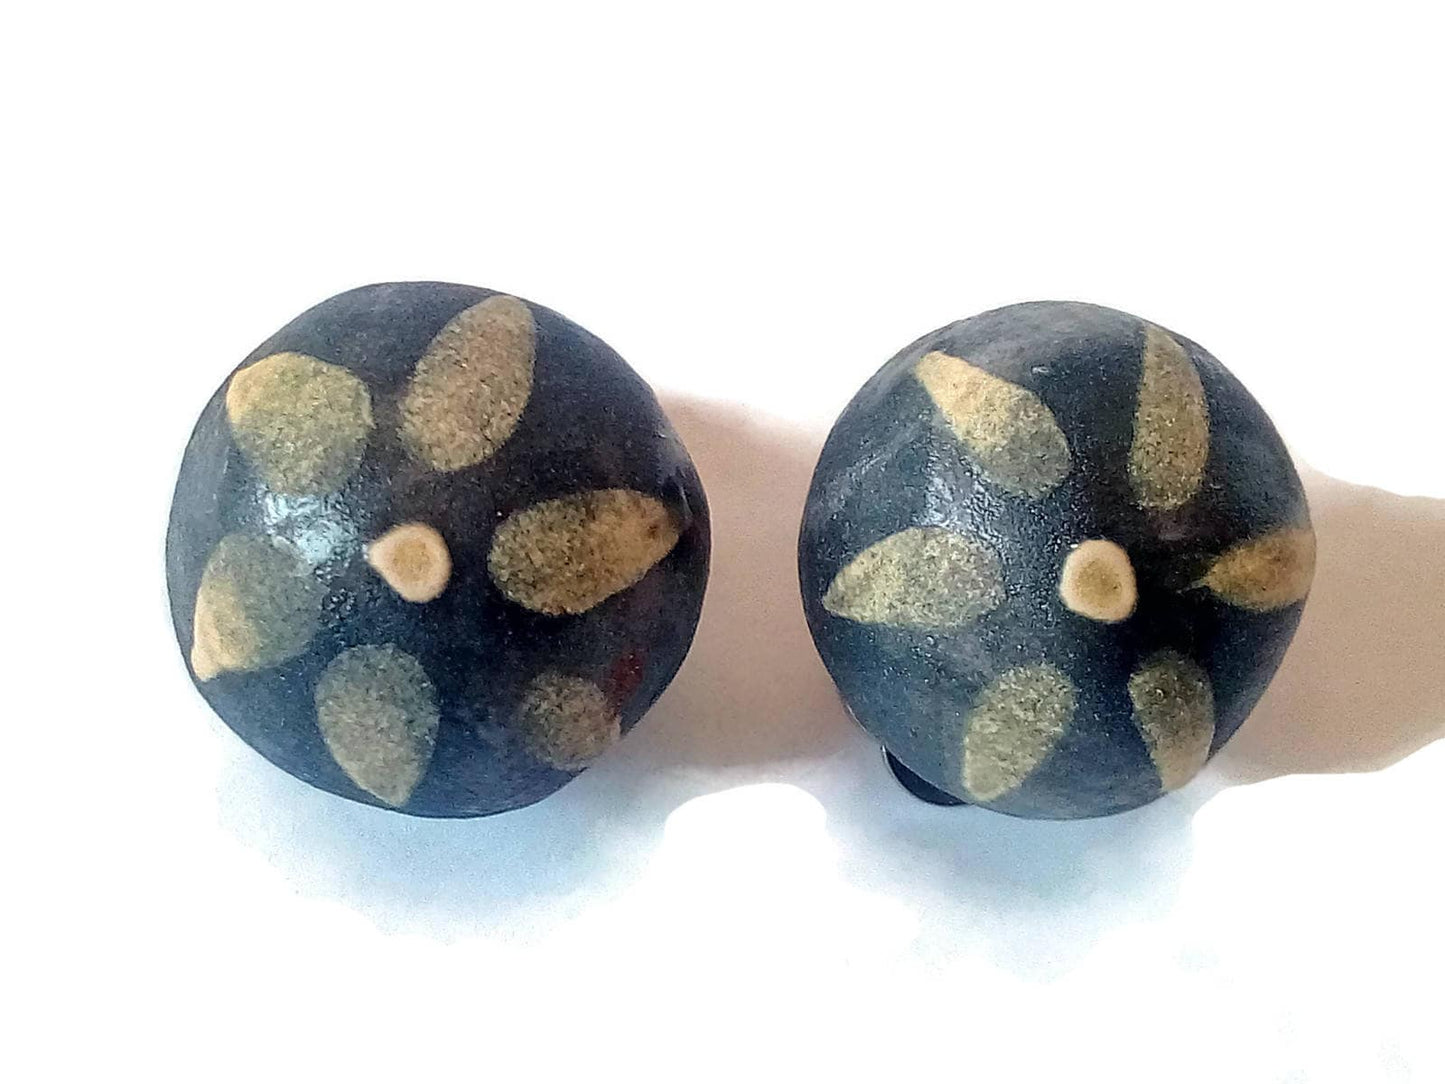 Black and Yellow Floral Clip On Earrings For Non Pierced Ears, Hand Painted Clay Stud Earrings, Handmade Jewelry For Mothers Day Gift - Ceramica Ana Rafael